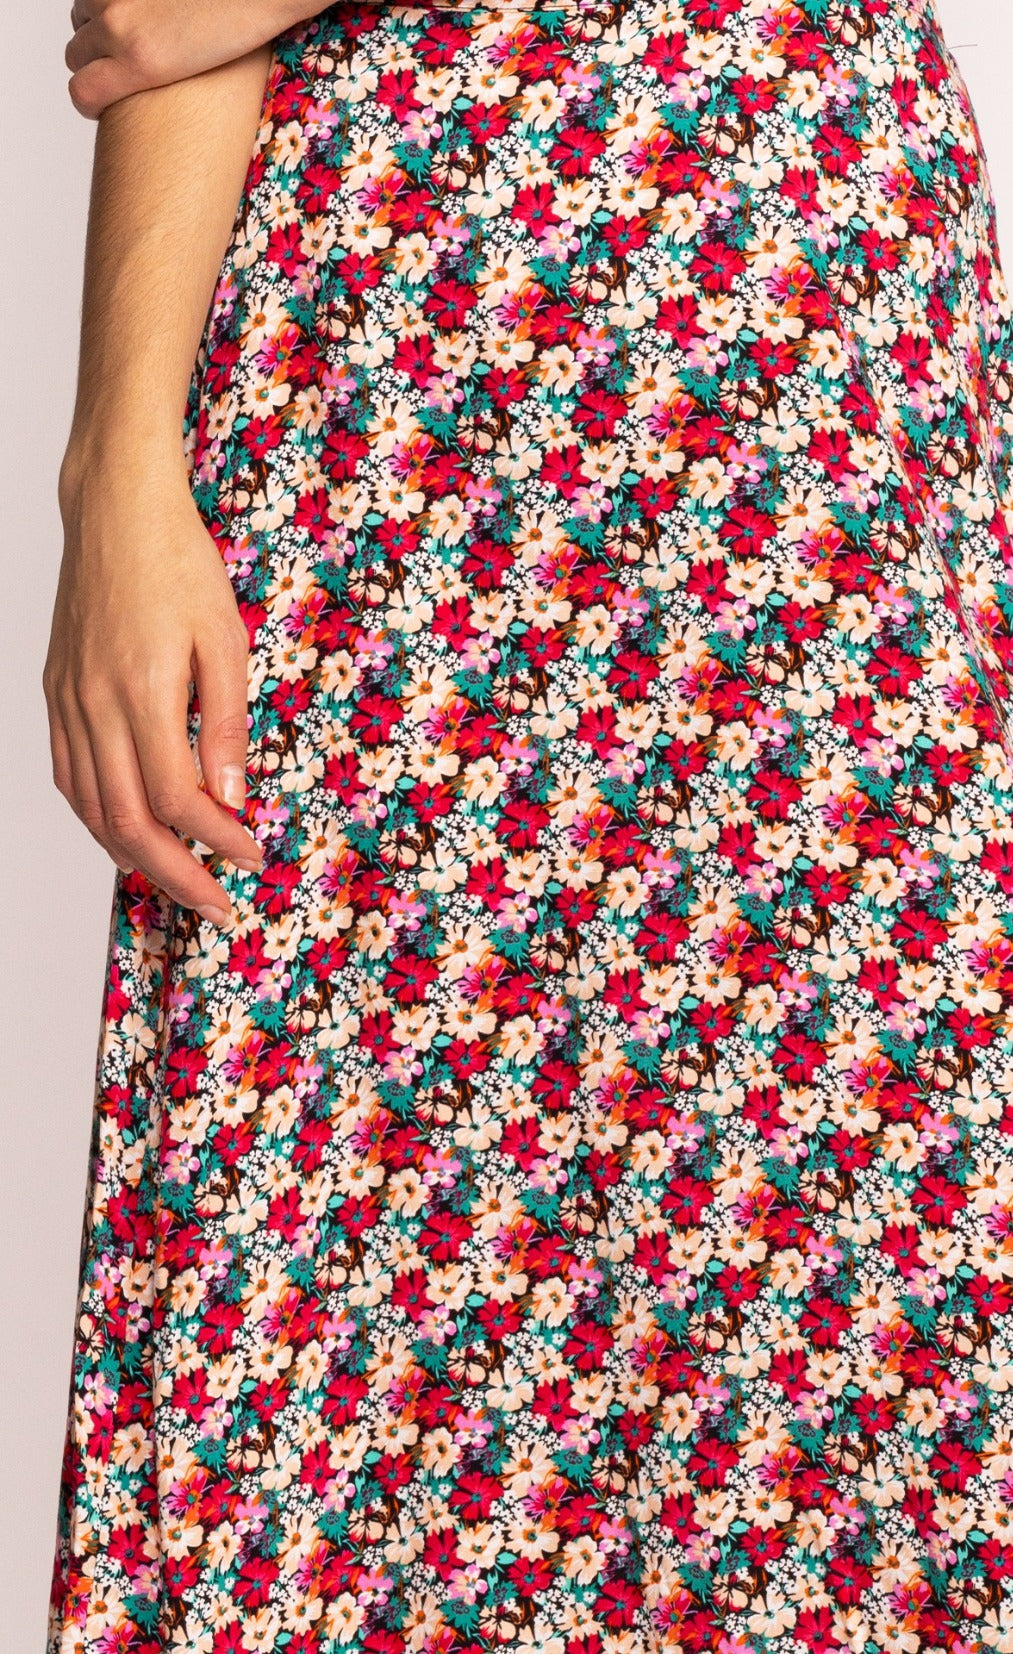 The Lainey Skirt - Pink Martini Collection